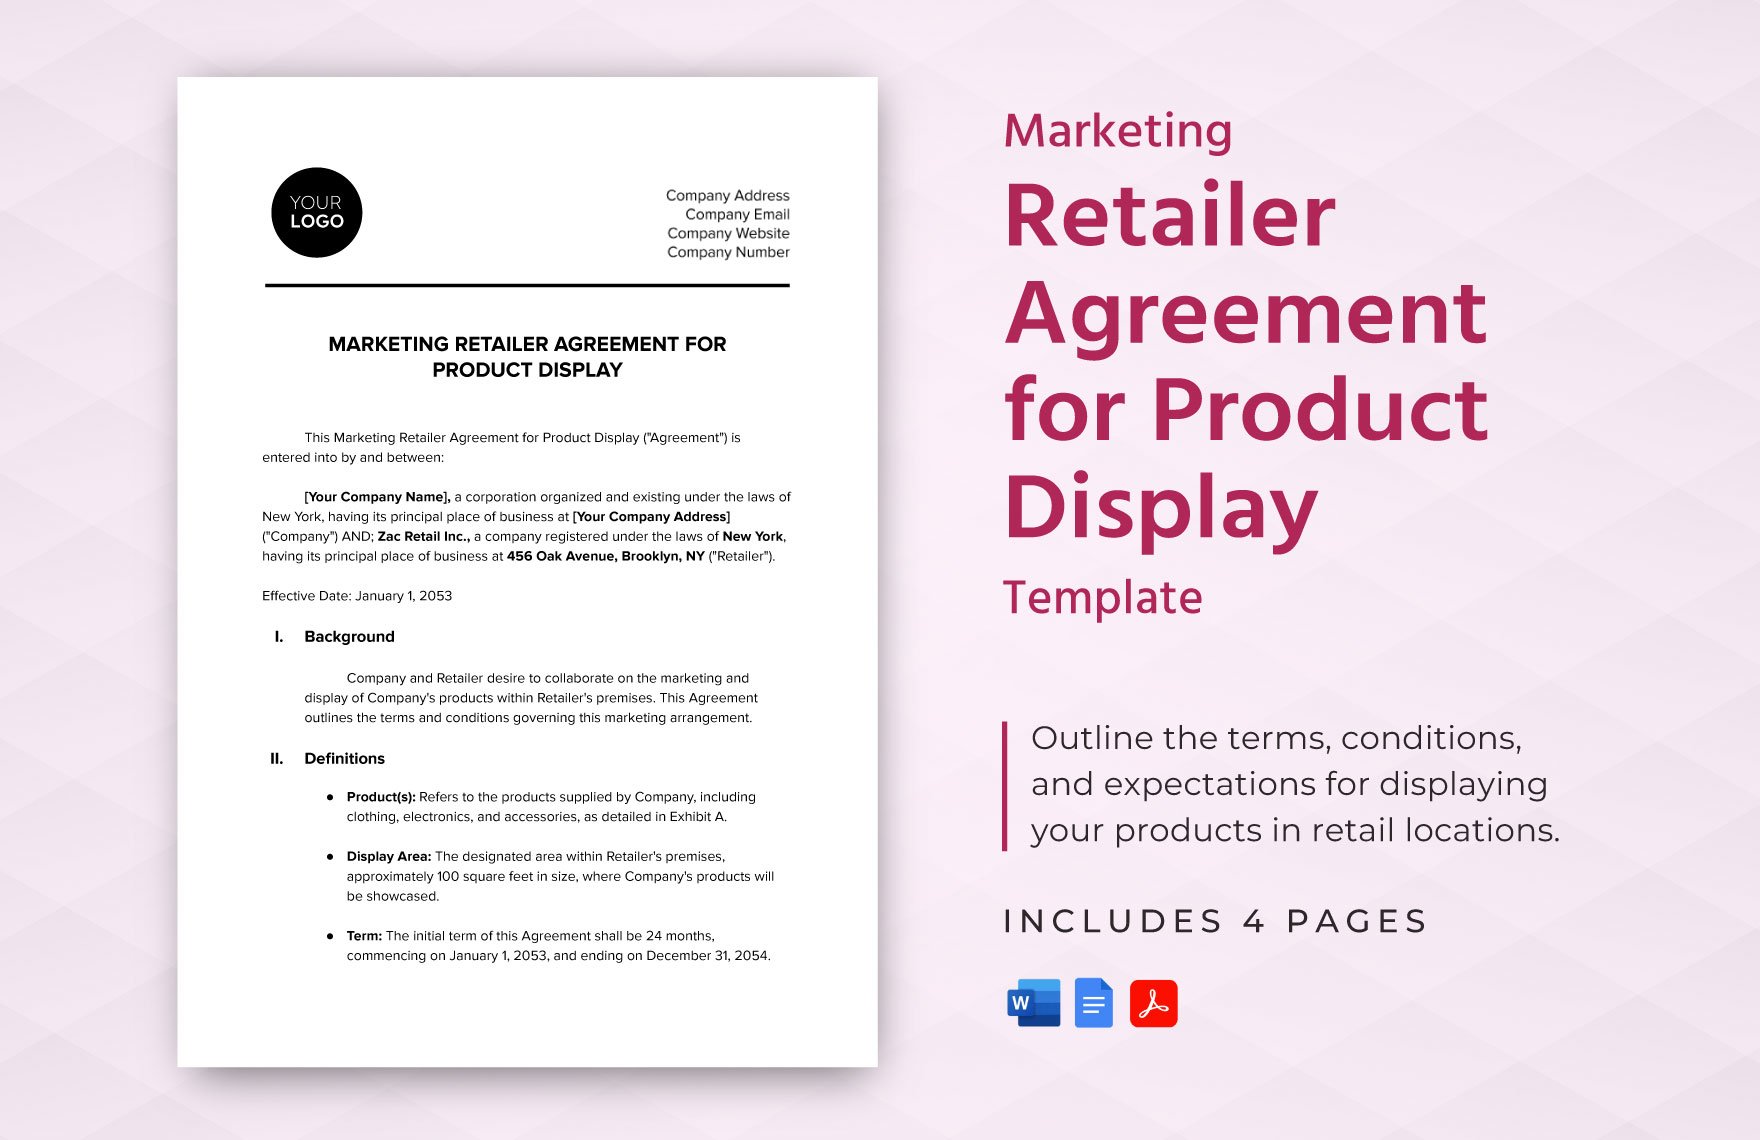 Marketing Retailer Agreement for Product Display Template in Word, Google Docs, PDF